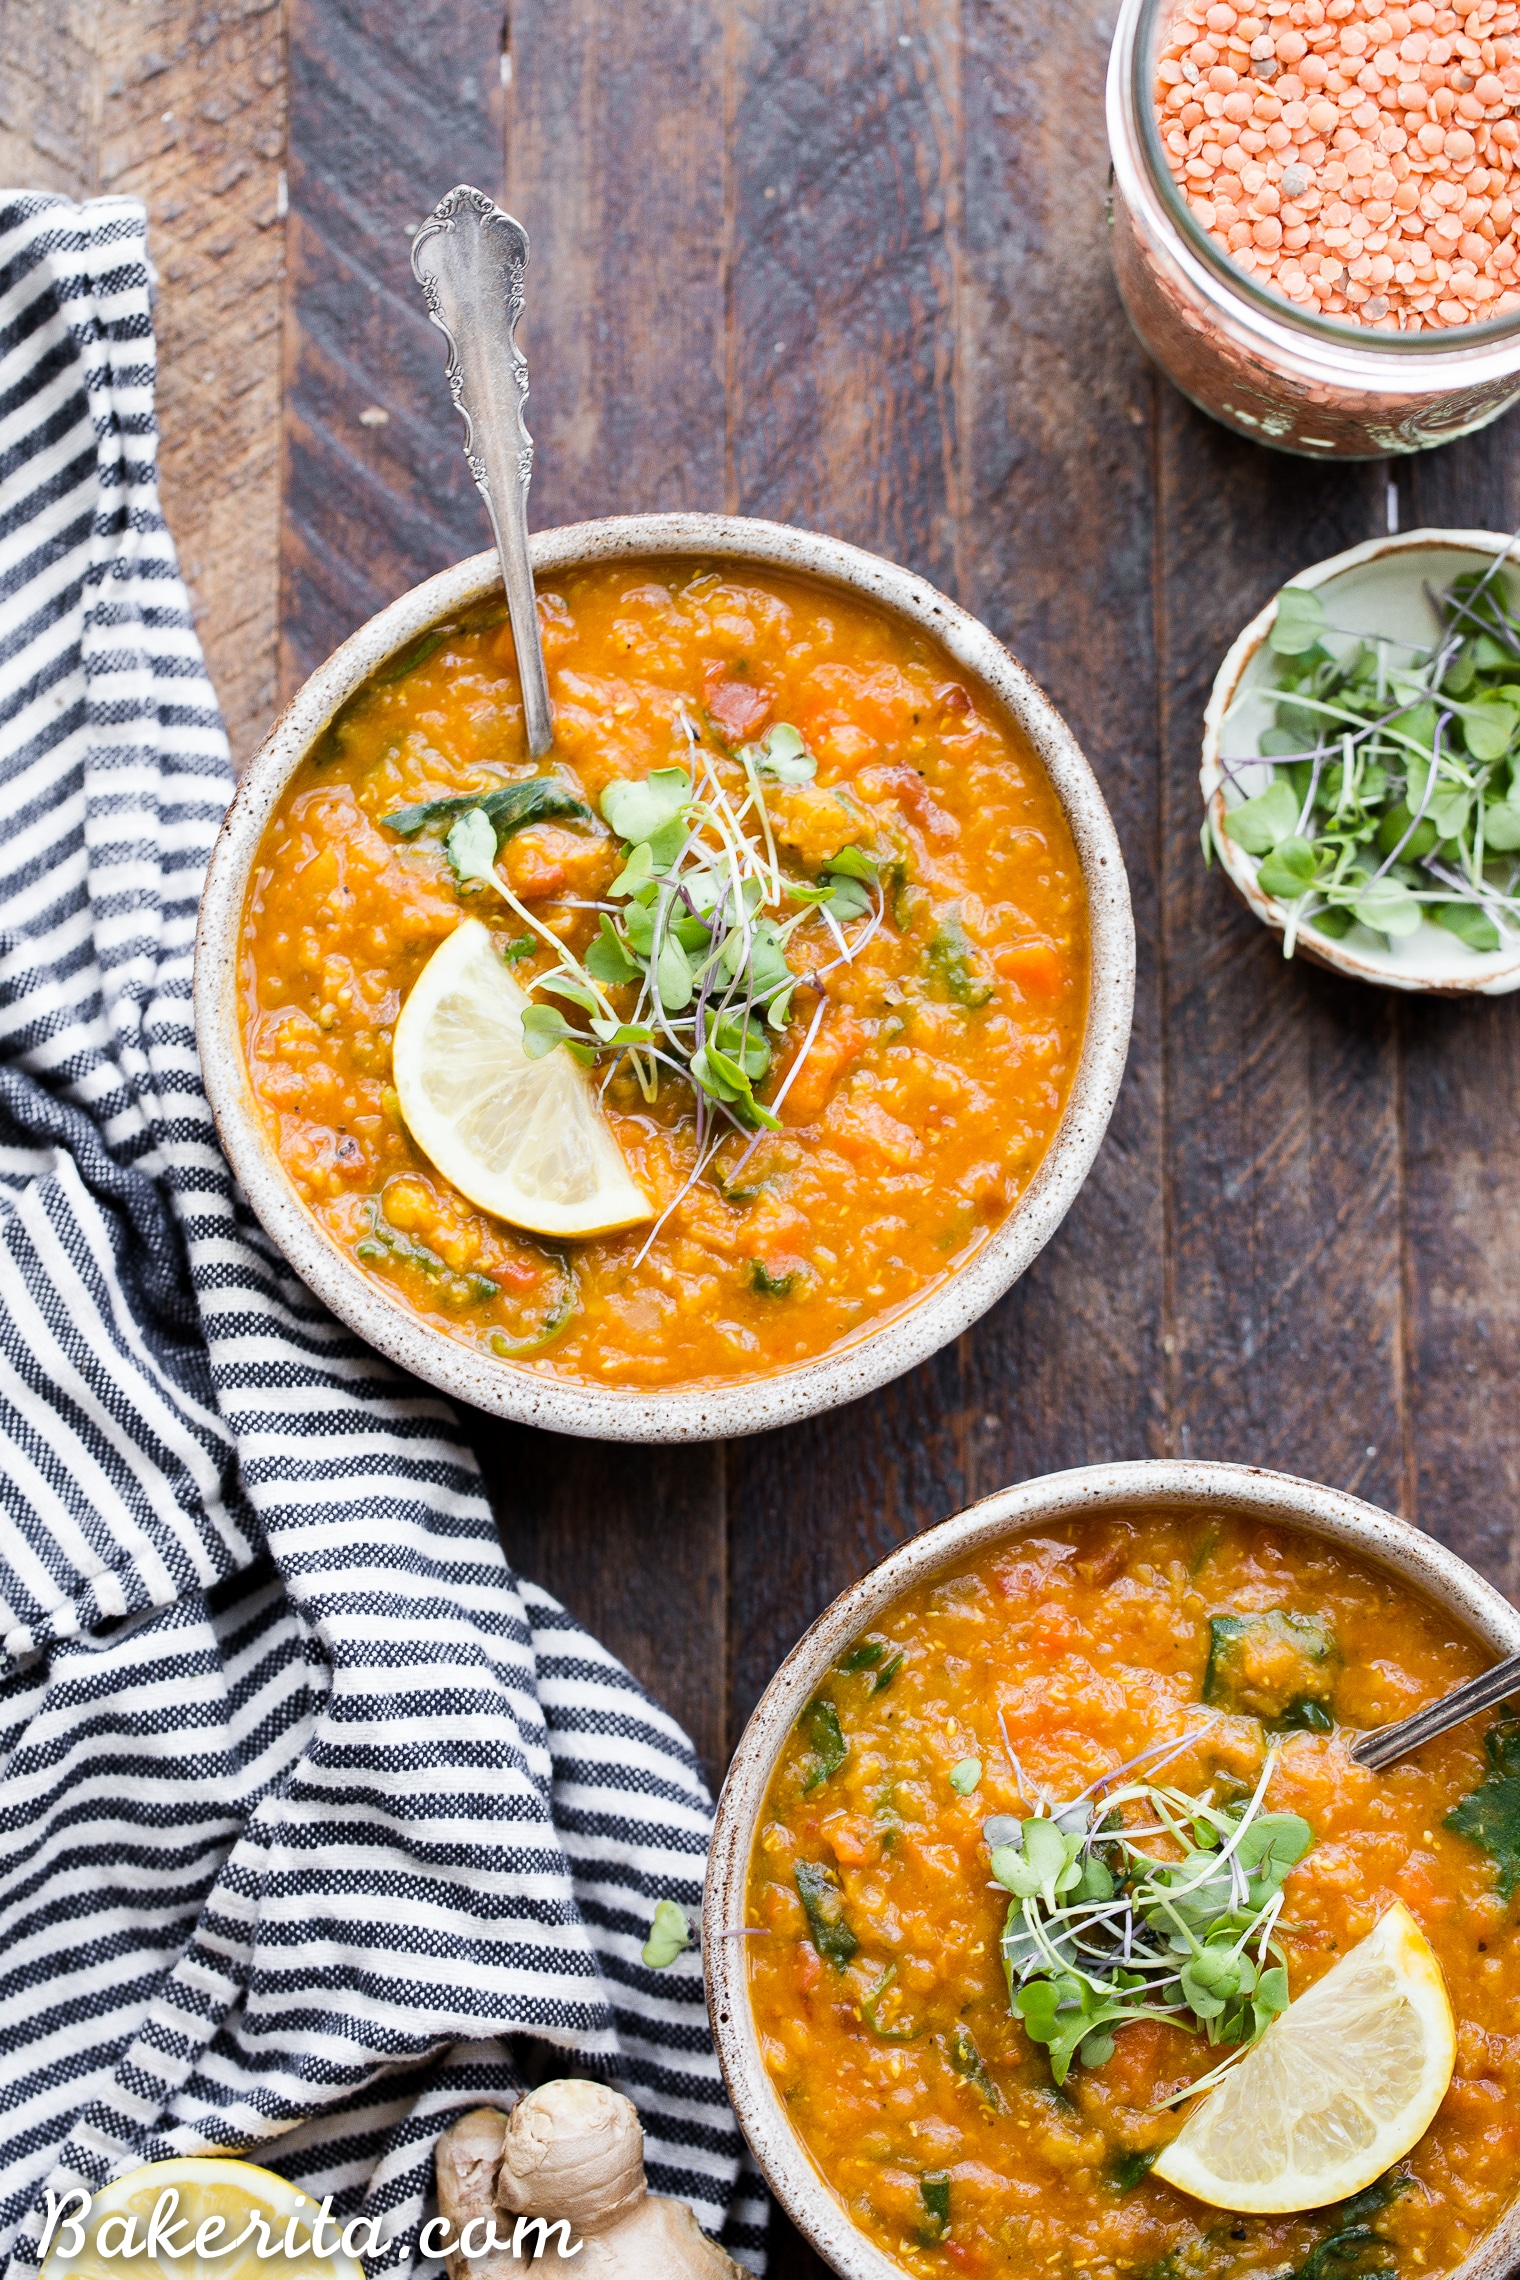 This spiced Vegan Red Lentil Soup is a warm, comforting meal that comes together in just 45 minutes. It's full of flavor from ginger, garlic, and spices, with a luxuriously rich texture. It's perfect with a squeeze of lemon to brighten things up!